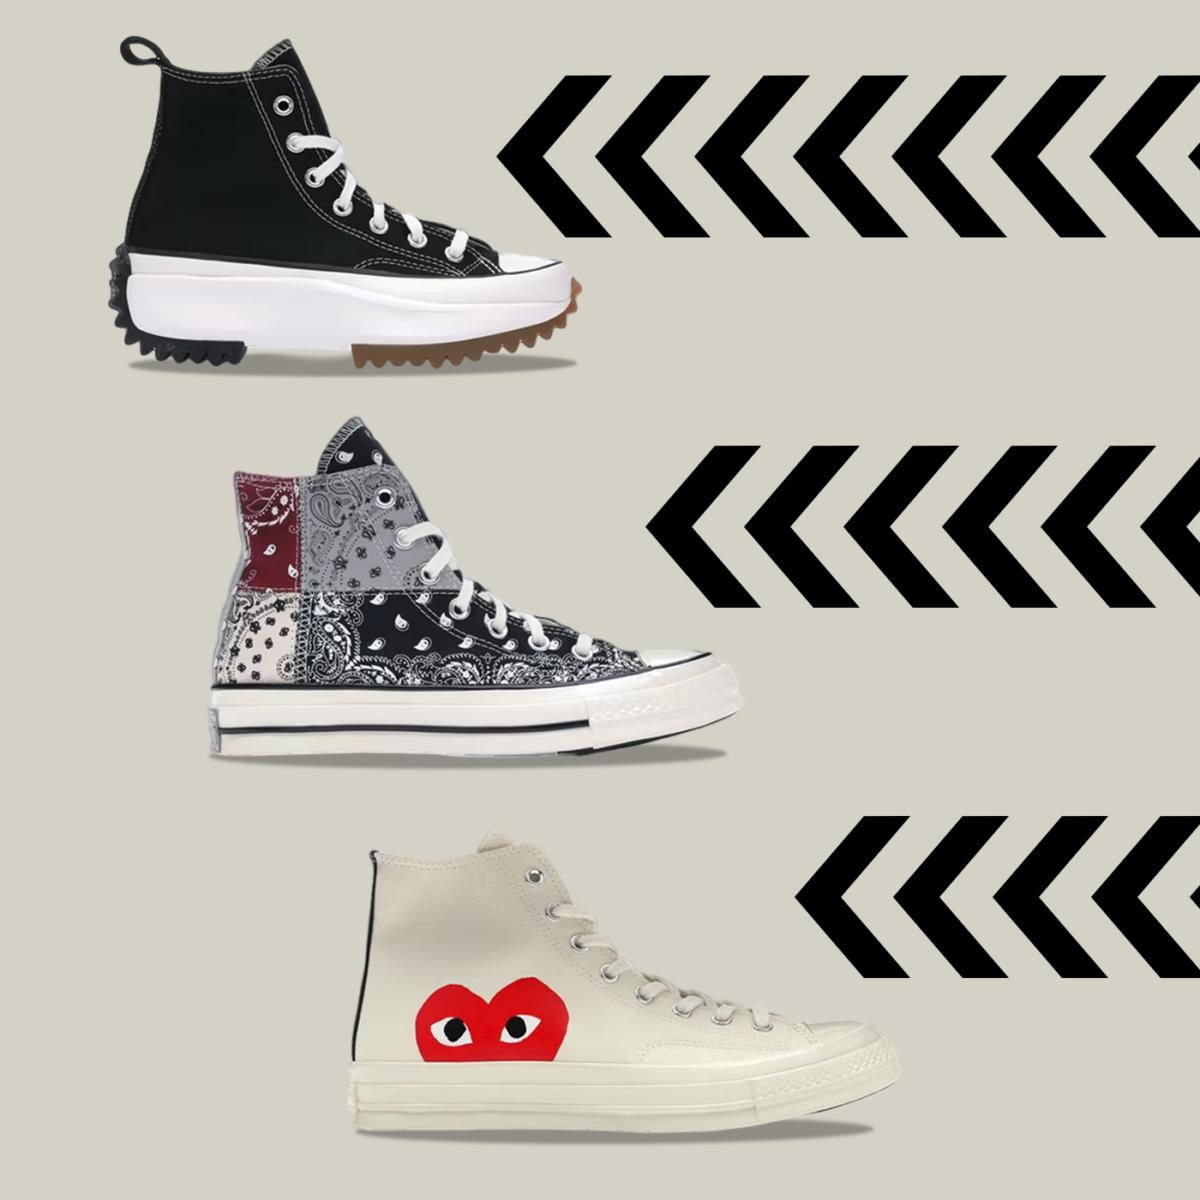 Converse makes first change in a century to the Chuck Taylor All Star  sneaker